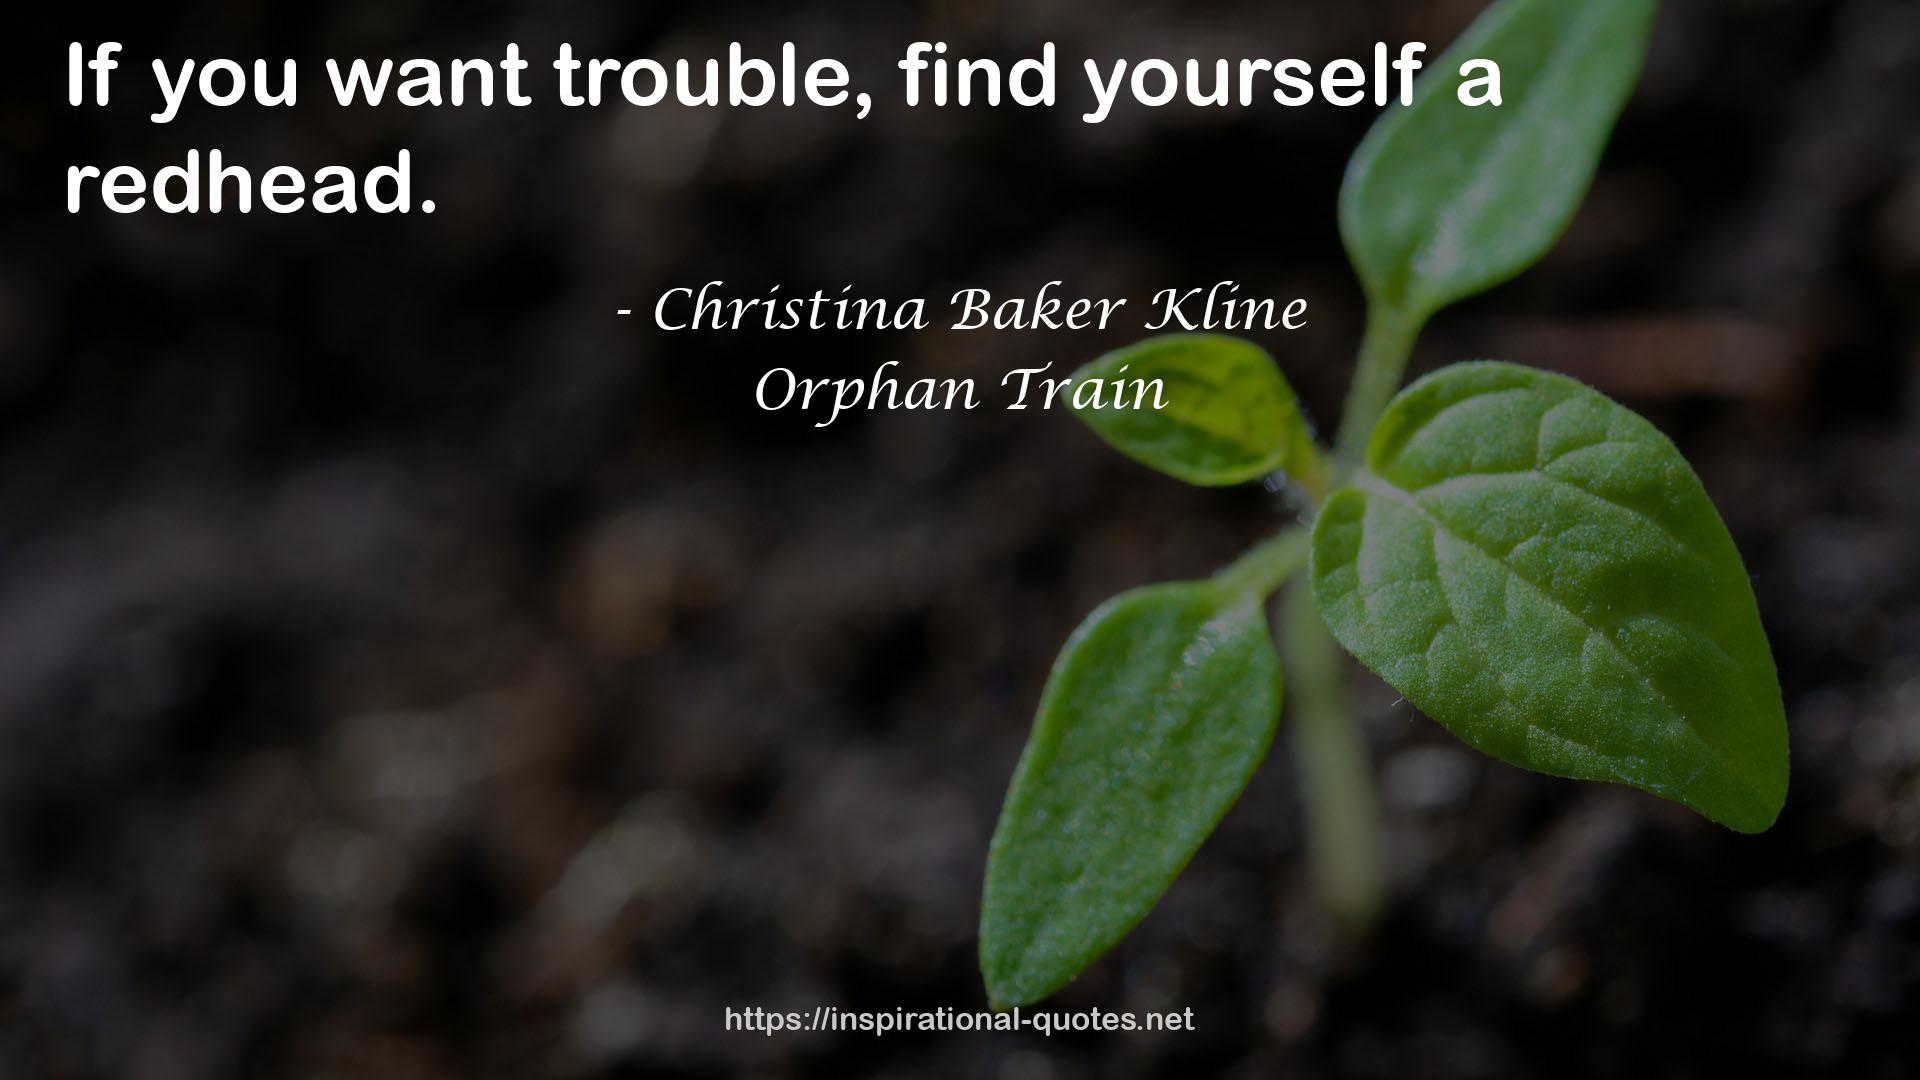 Orphan Train QUOTES